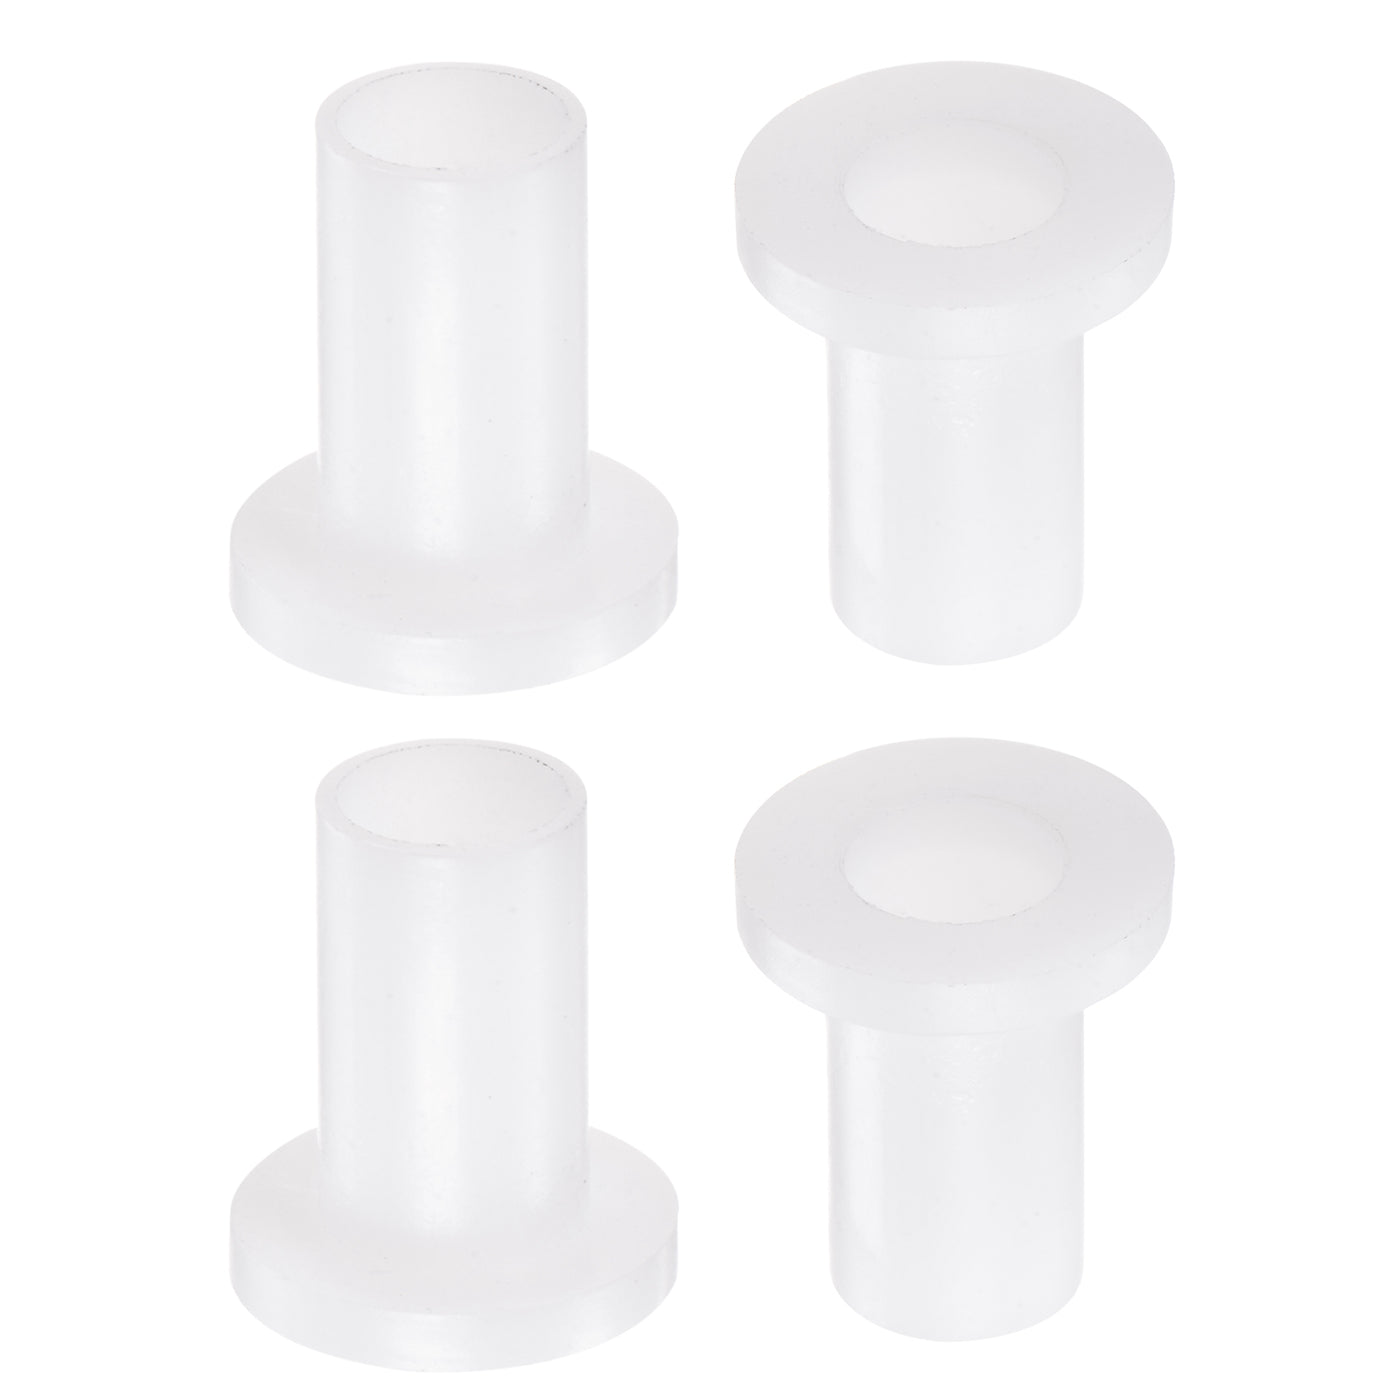 uxcell Uxcell 4pcs Flanged Sleeve Bearings 10mm ID 12mm OD 23.3mm Length Nylon Bushings, White